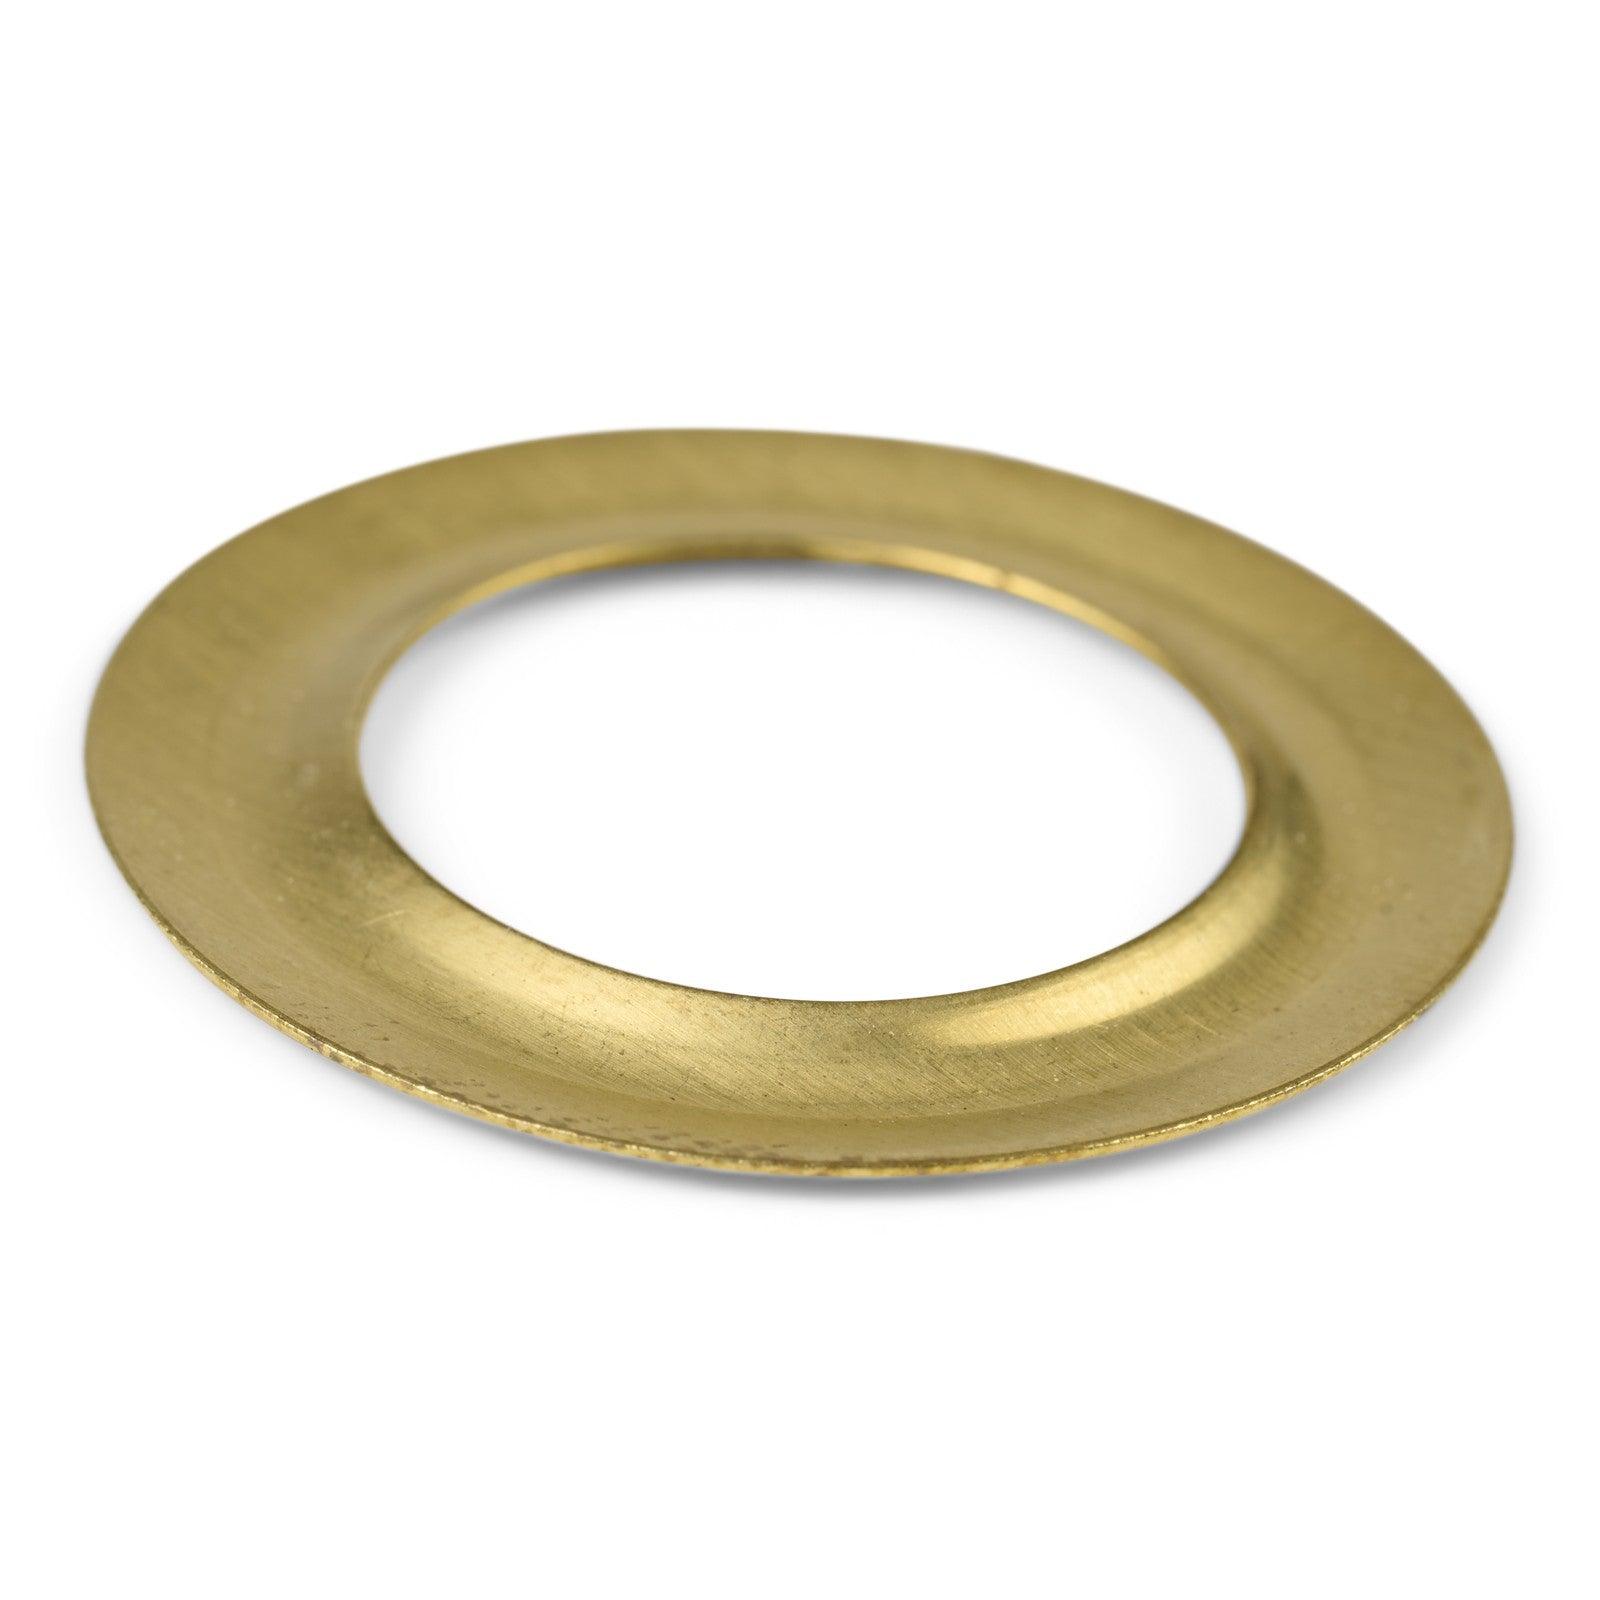 Brass Grommets with Plain Washers - Size #4 | by Tarps Now